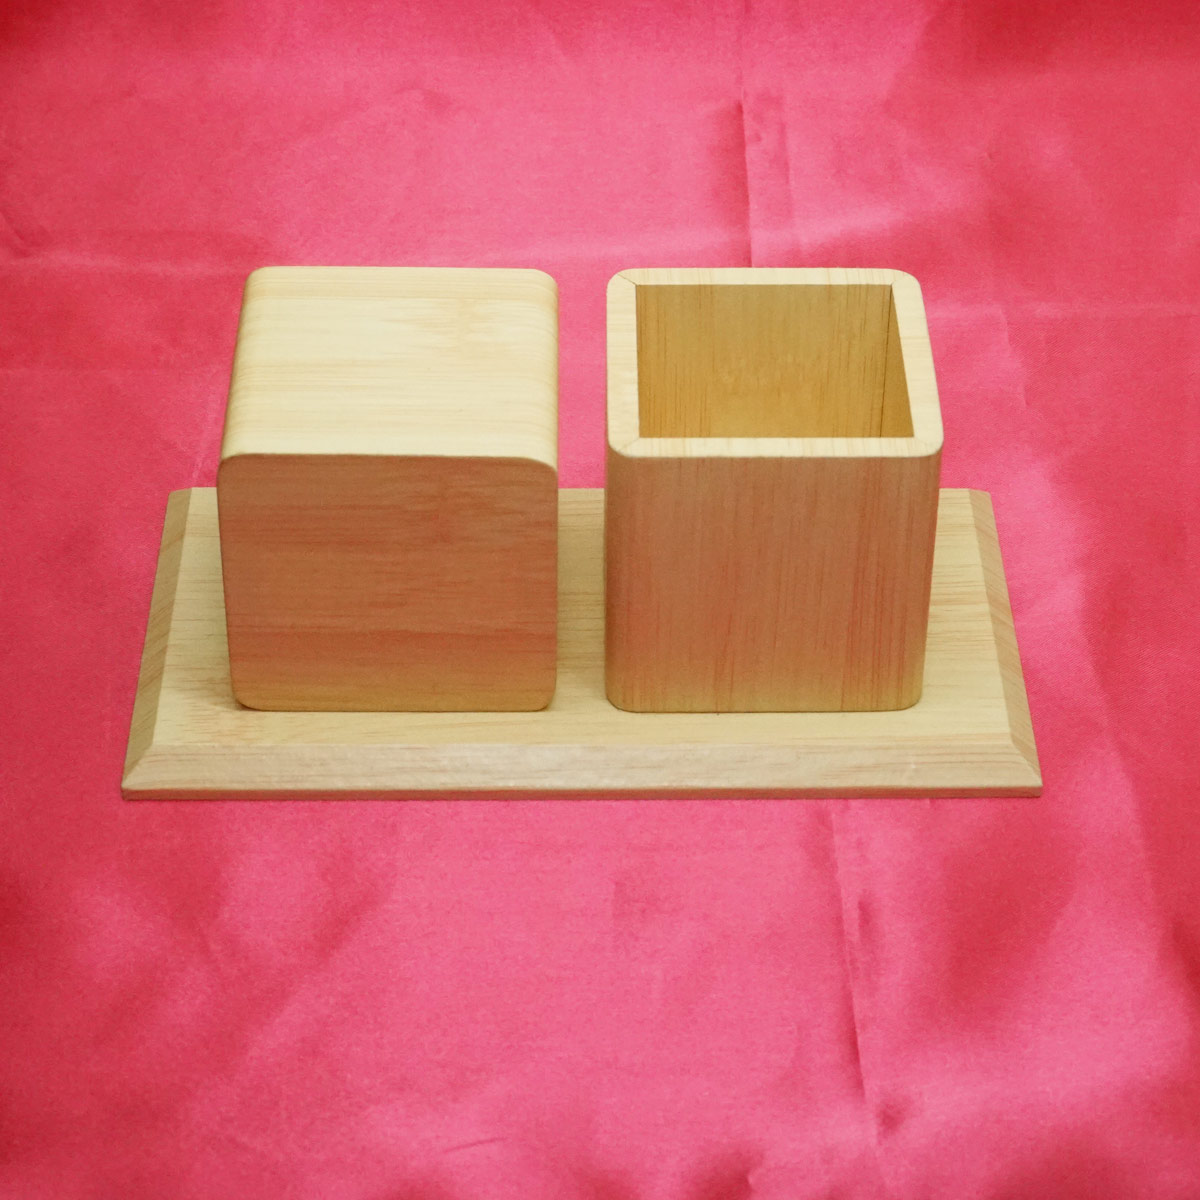 Penhouse.in Plastic Pen Stand Wooden Finish with USB cable and Battery Connecting display Shown Time  SKU 21766